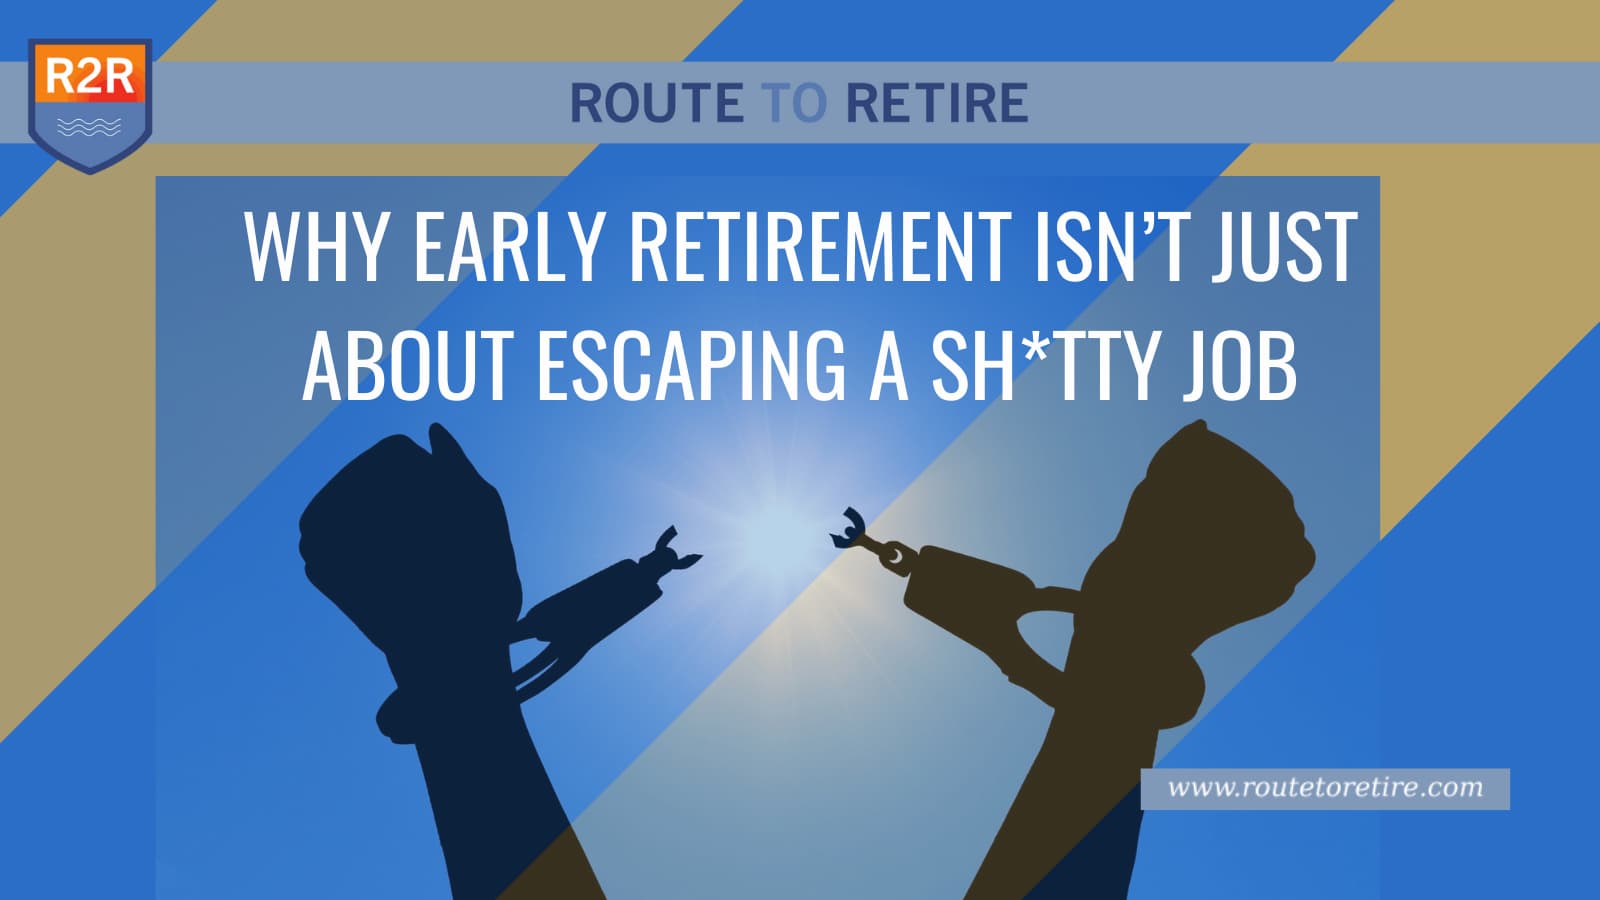 Why Early Retirement Isn’t Just About Escaping a Sh*tty Job